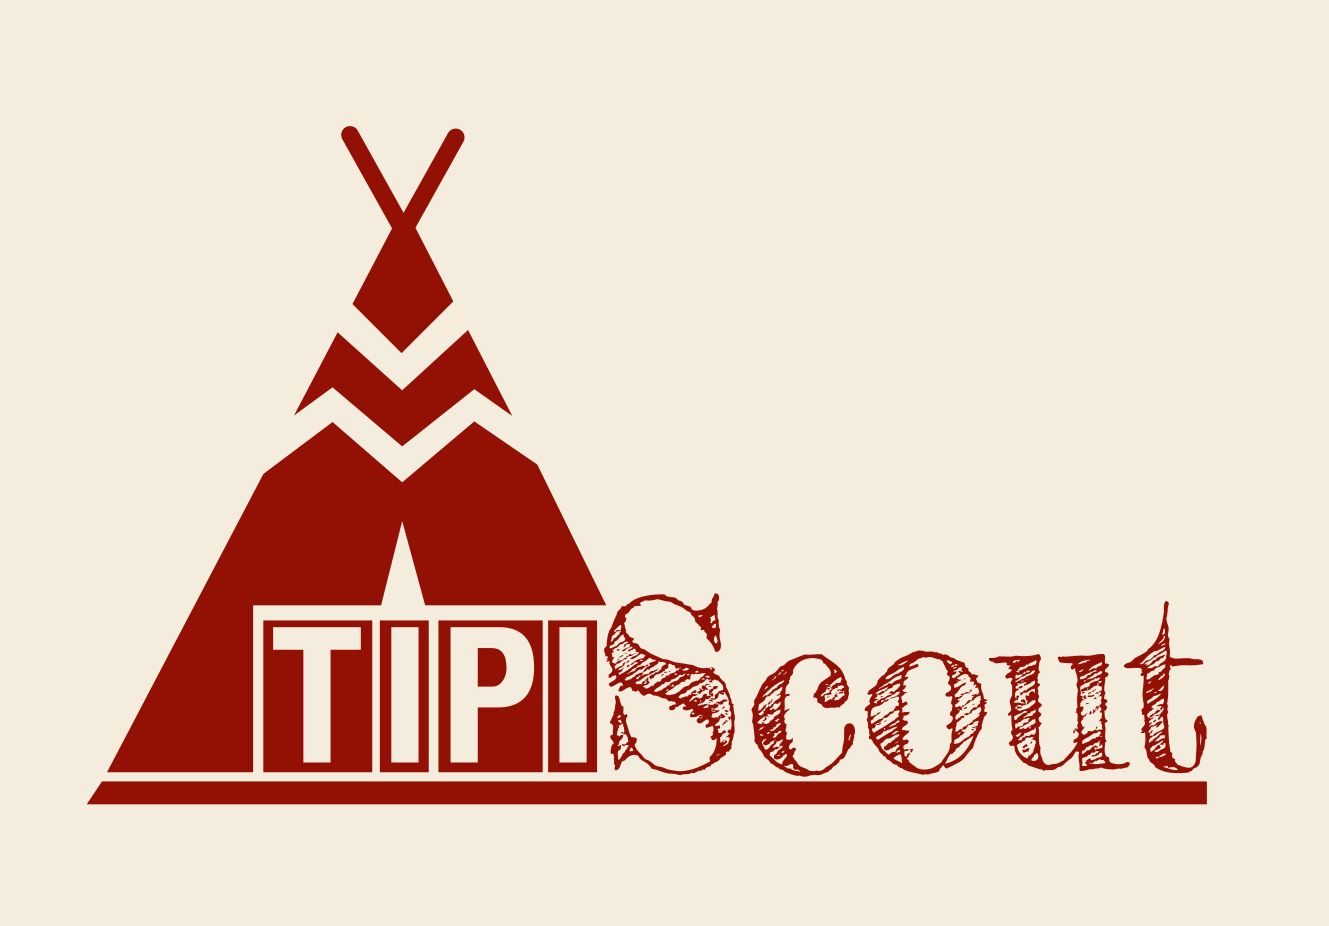 Tipi Scout